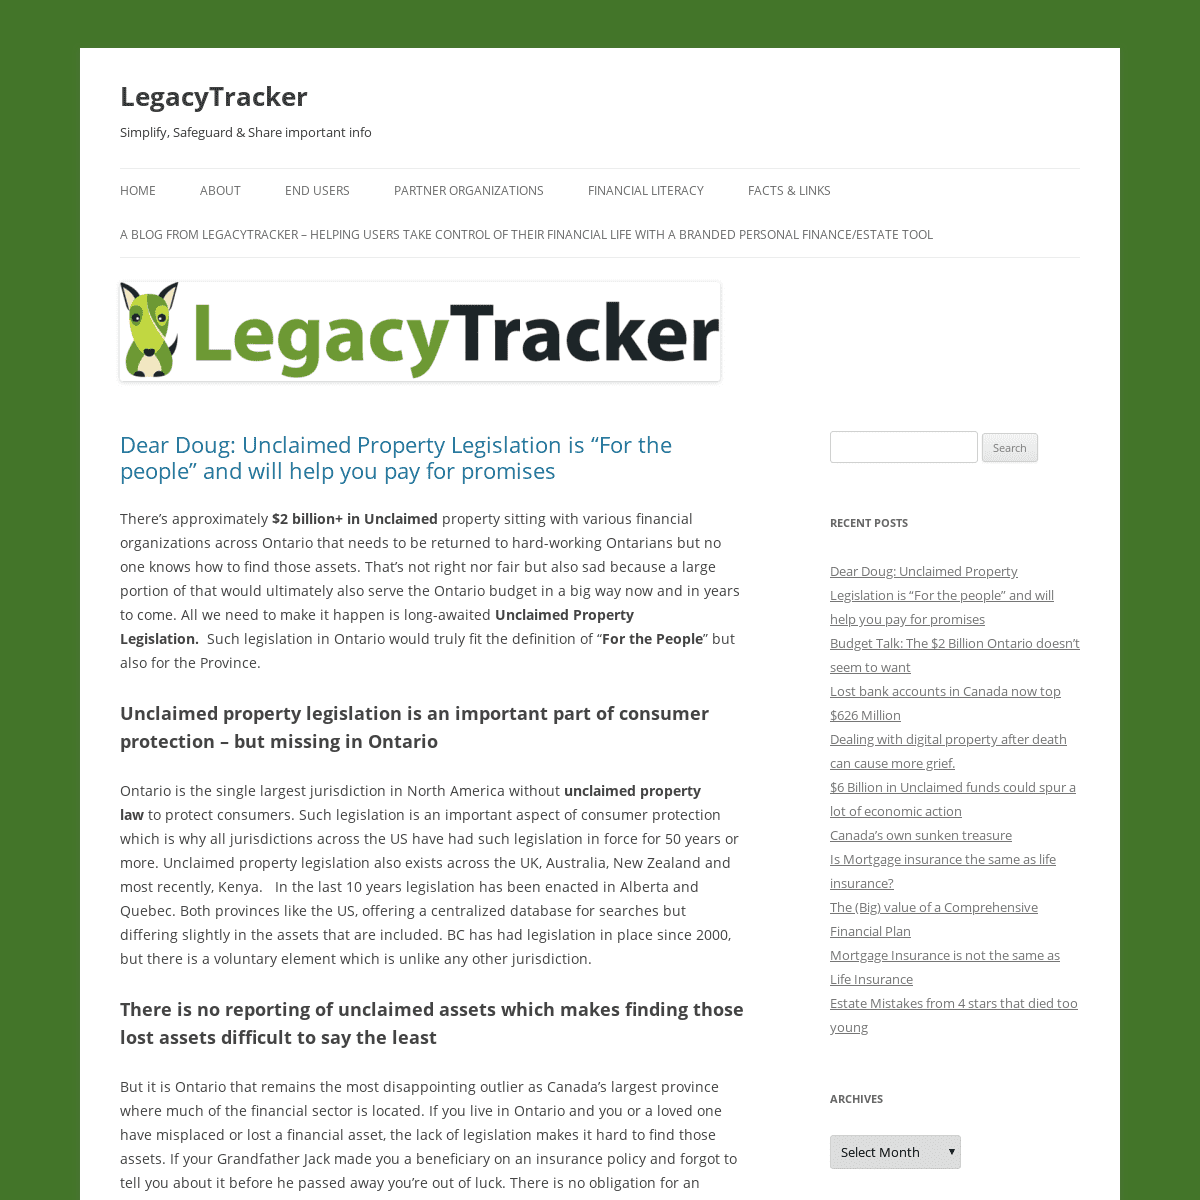 LegacyTracker - Simplify, Safeguard & Share important info